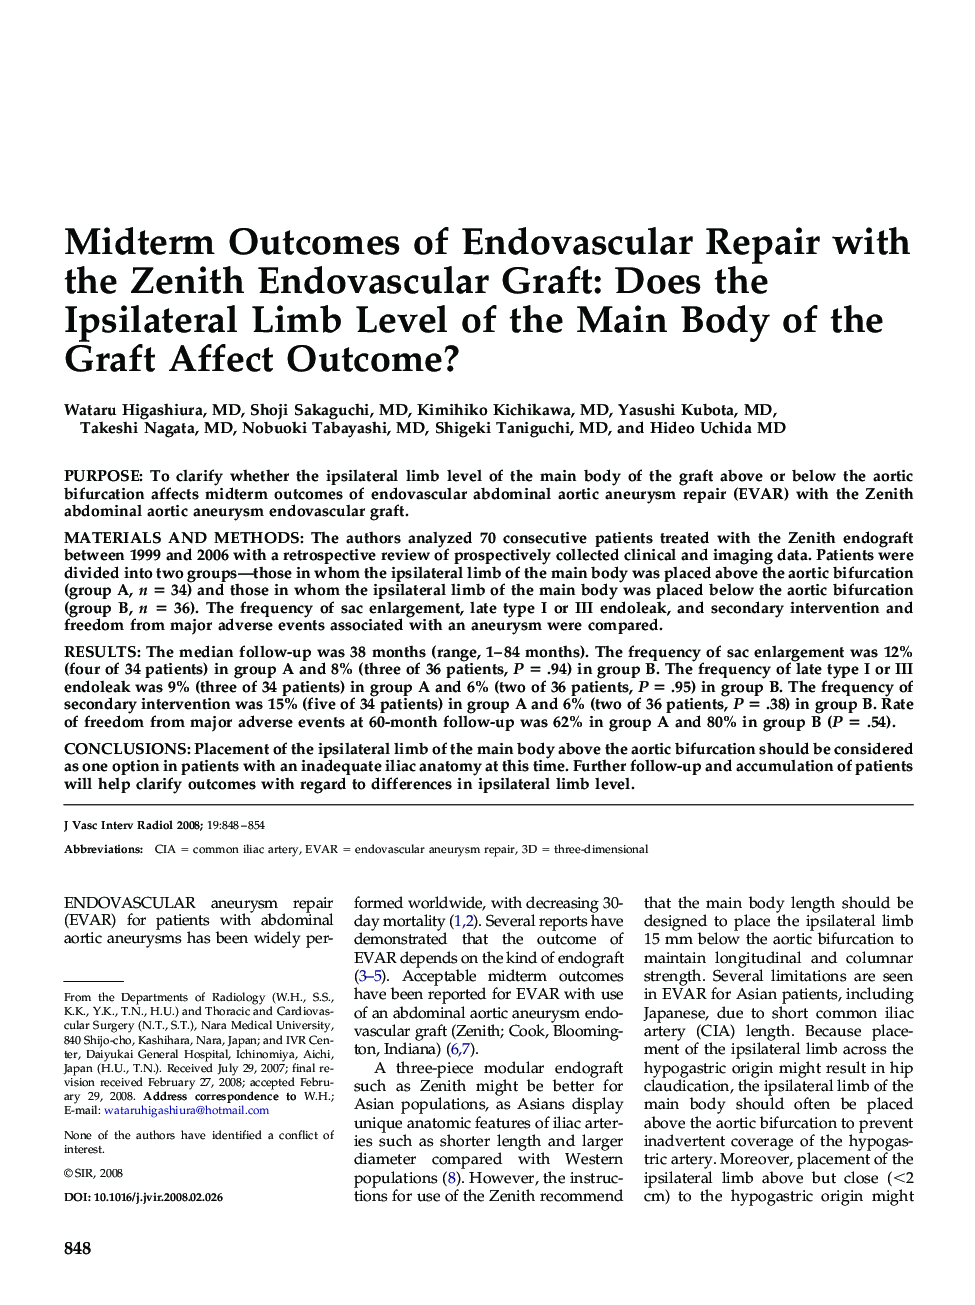 Midterm Outcomes of Endovascular Repair with the Zenith Endovascular Graft: Does the Ipsilateral Limb Level of the Main Body of the Graft Affect Outcome?